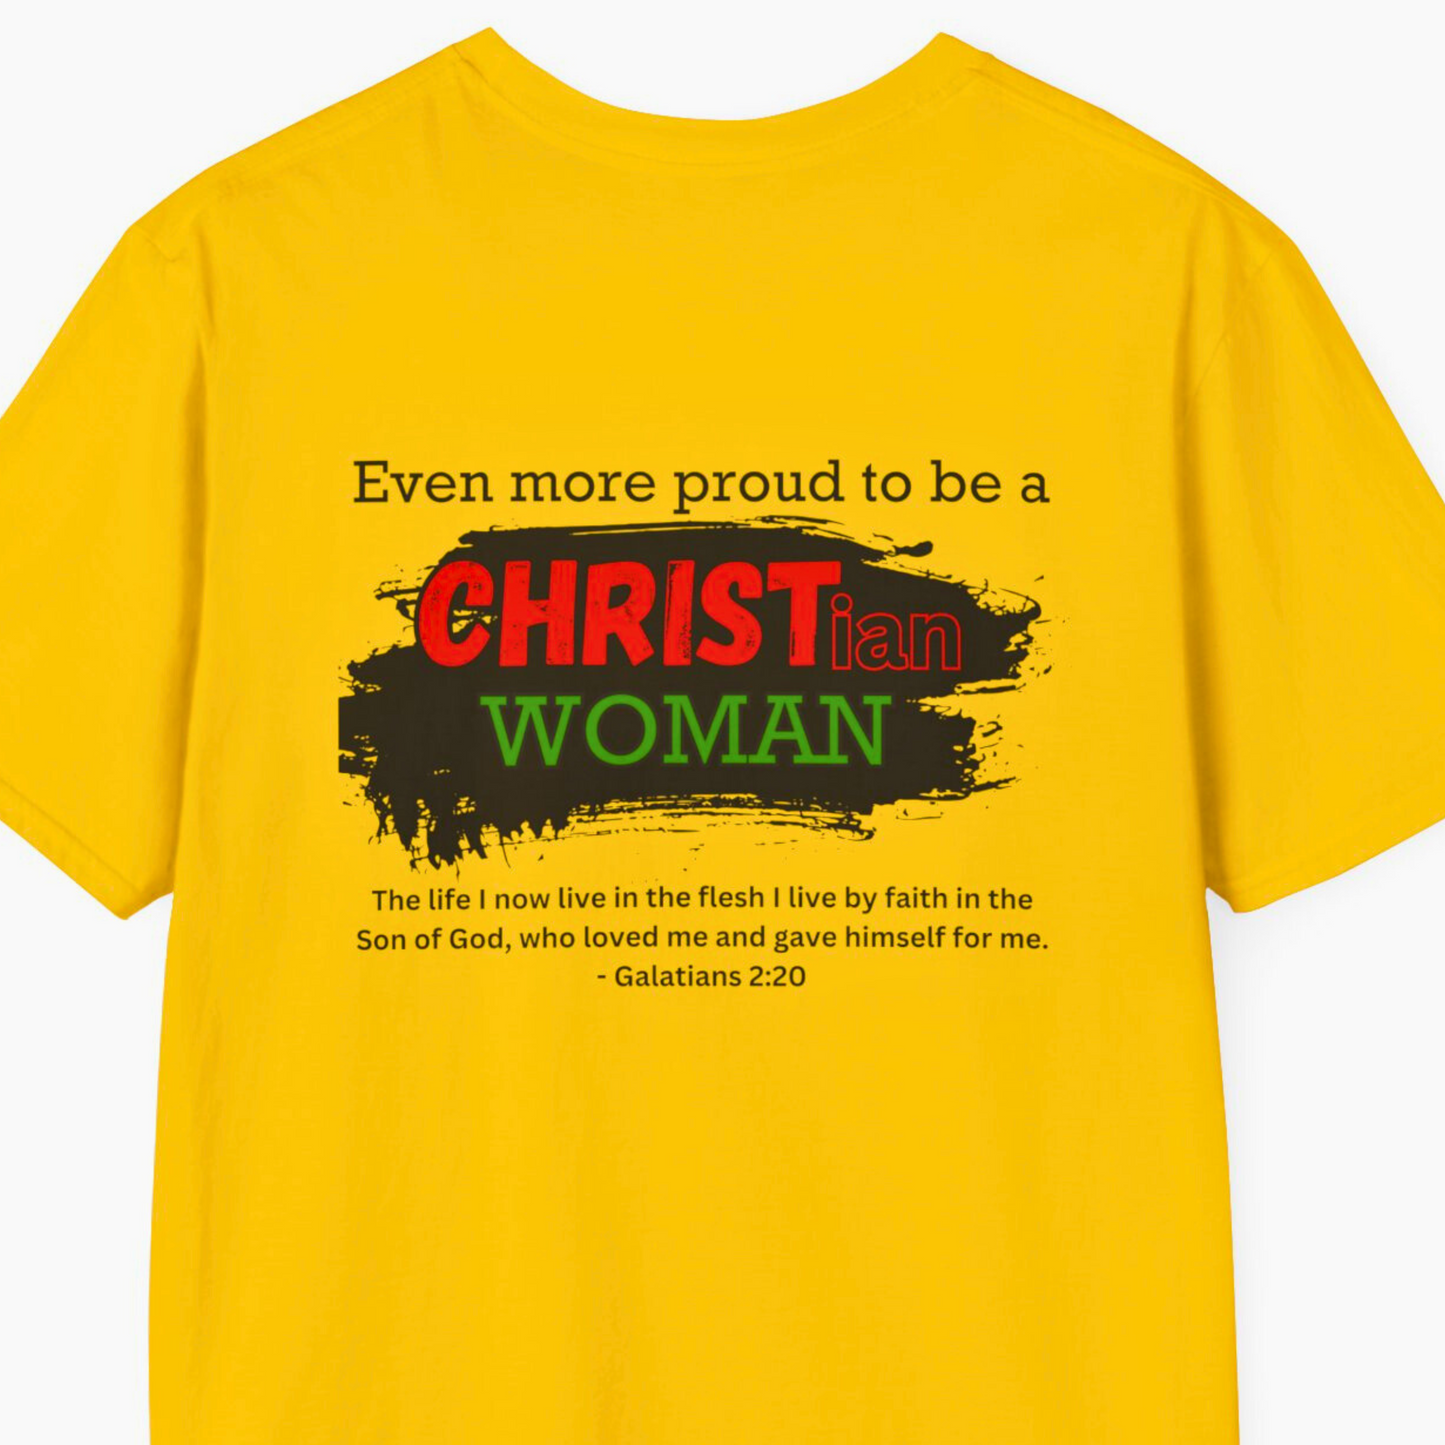 Shop now for our empowering "Proud to be a Black Christian Woman" t-shirt. This stylish yellow tee, available in our online store, celebrates the intersection of Black History and faith. Make a bold statement with confidence and proudly showcase your beliefs. 🖤✝️ #BlackChristianWoman #FaithFashion #BlackHistoryFashion